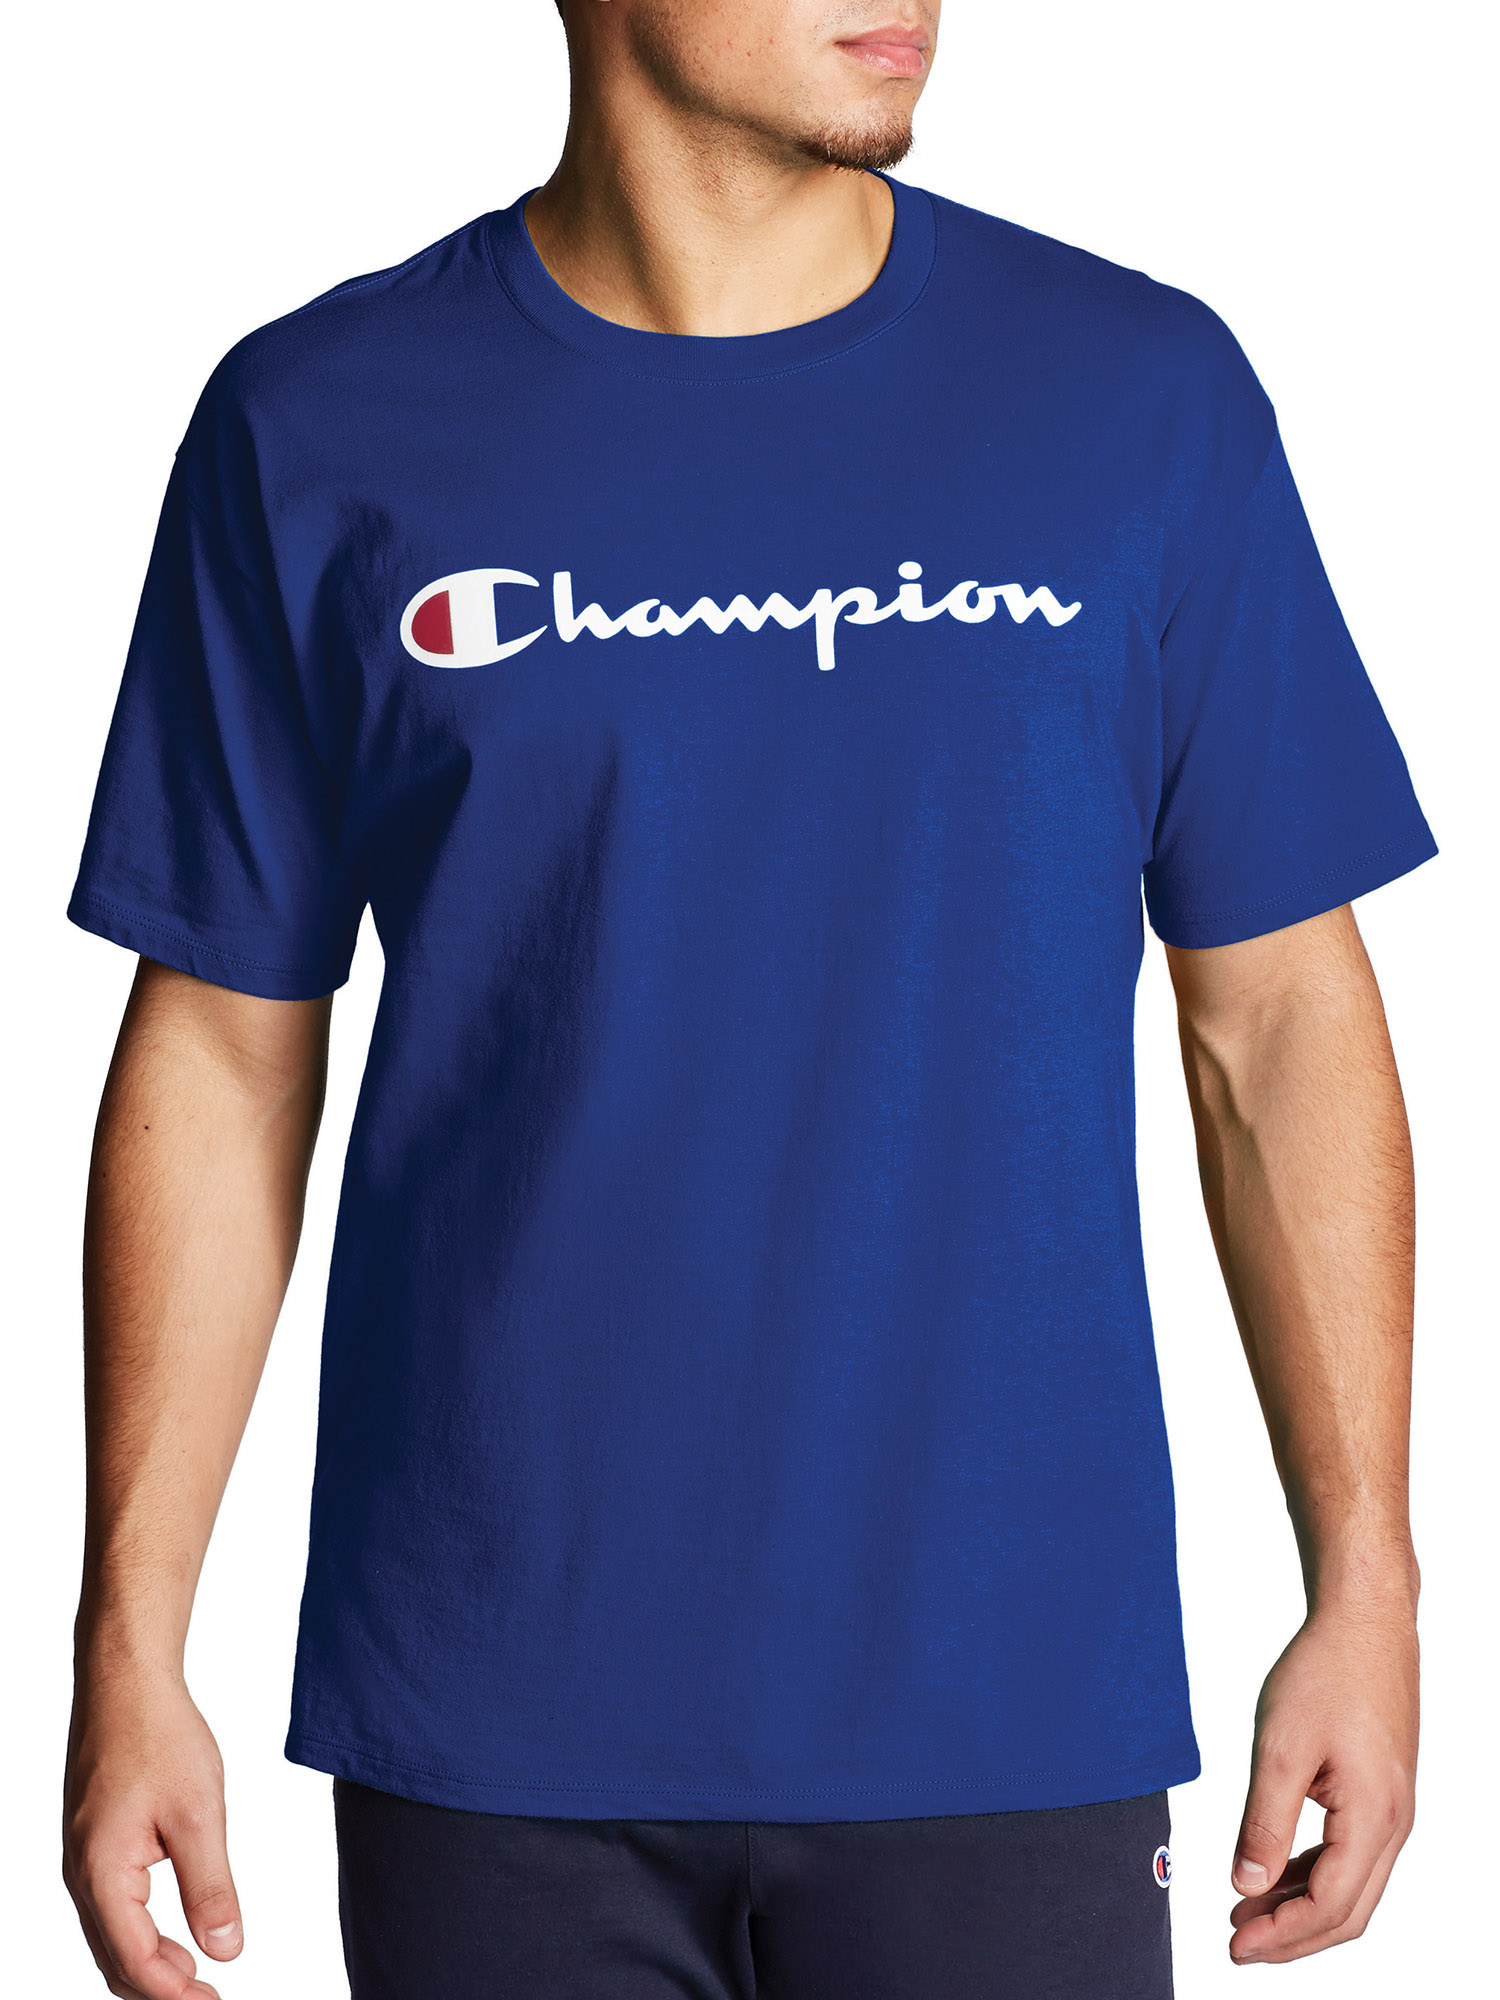 Champion CLOSED BOTTOM EVERYDAY COTTON PANT - image 1 of 4